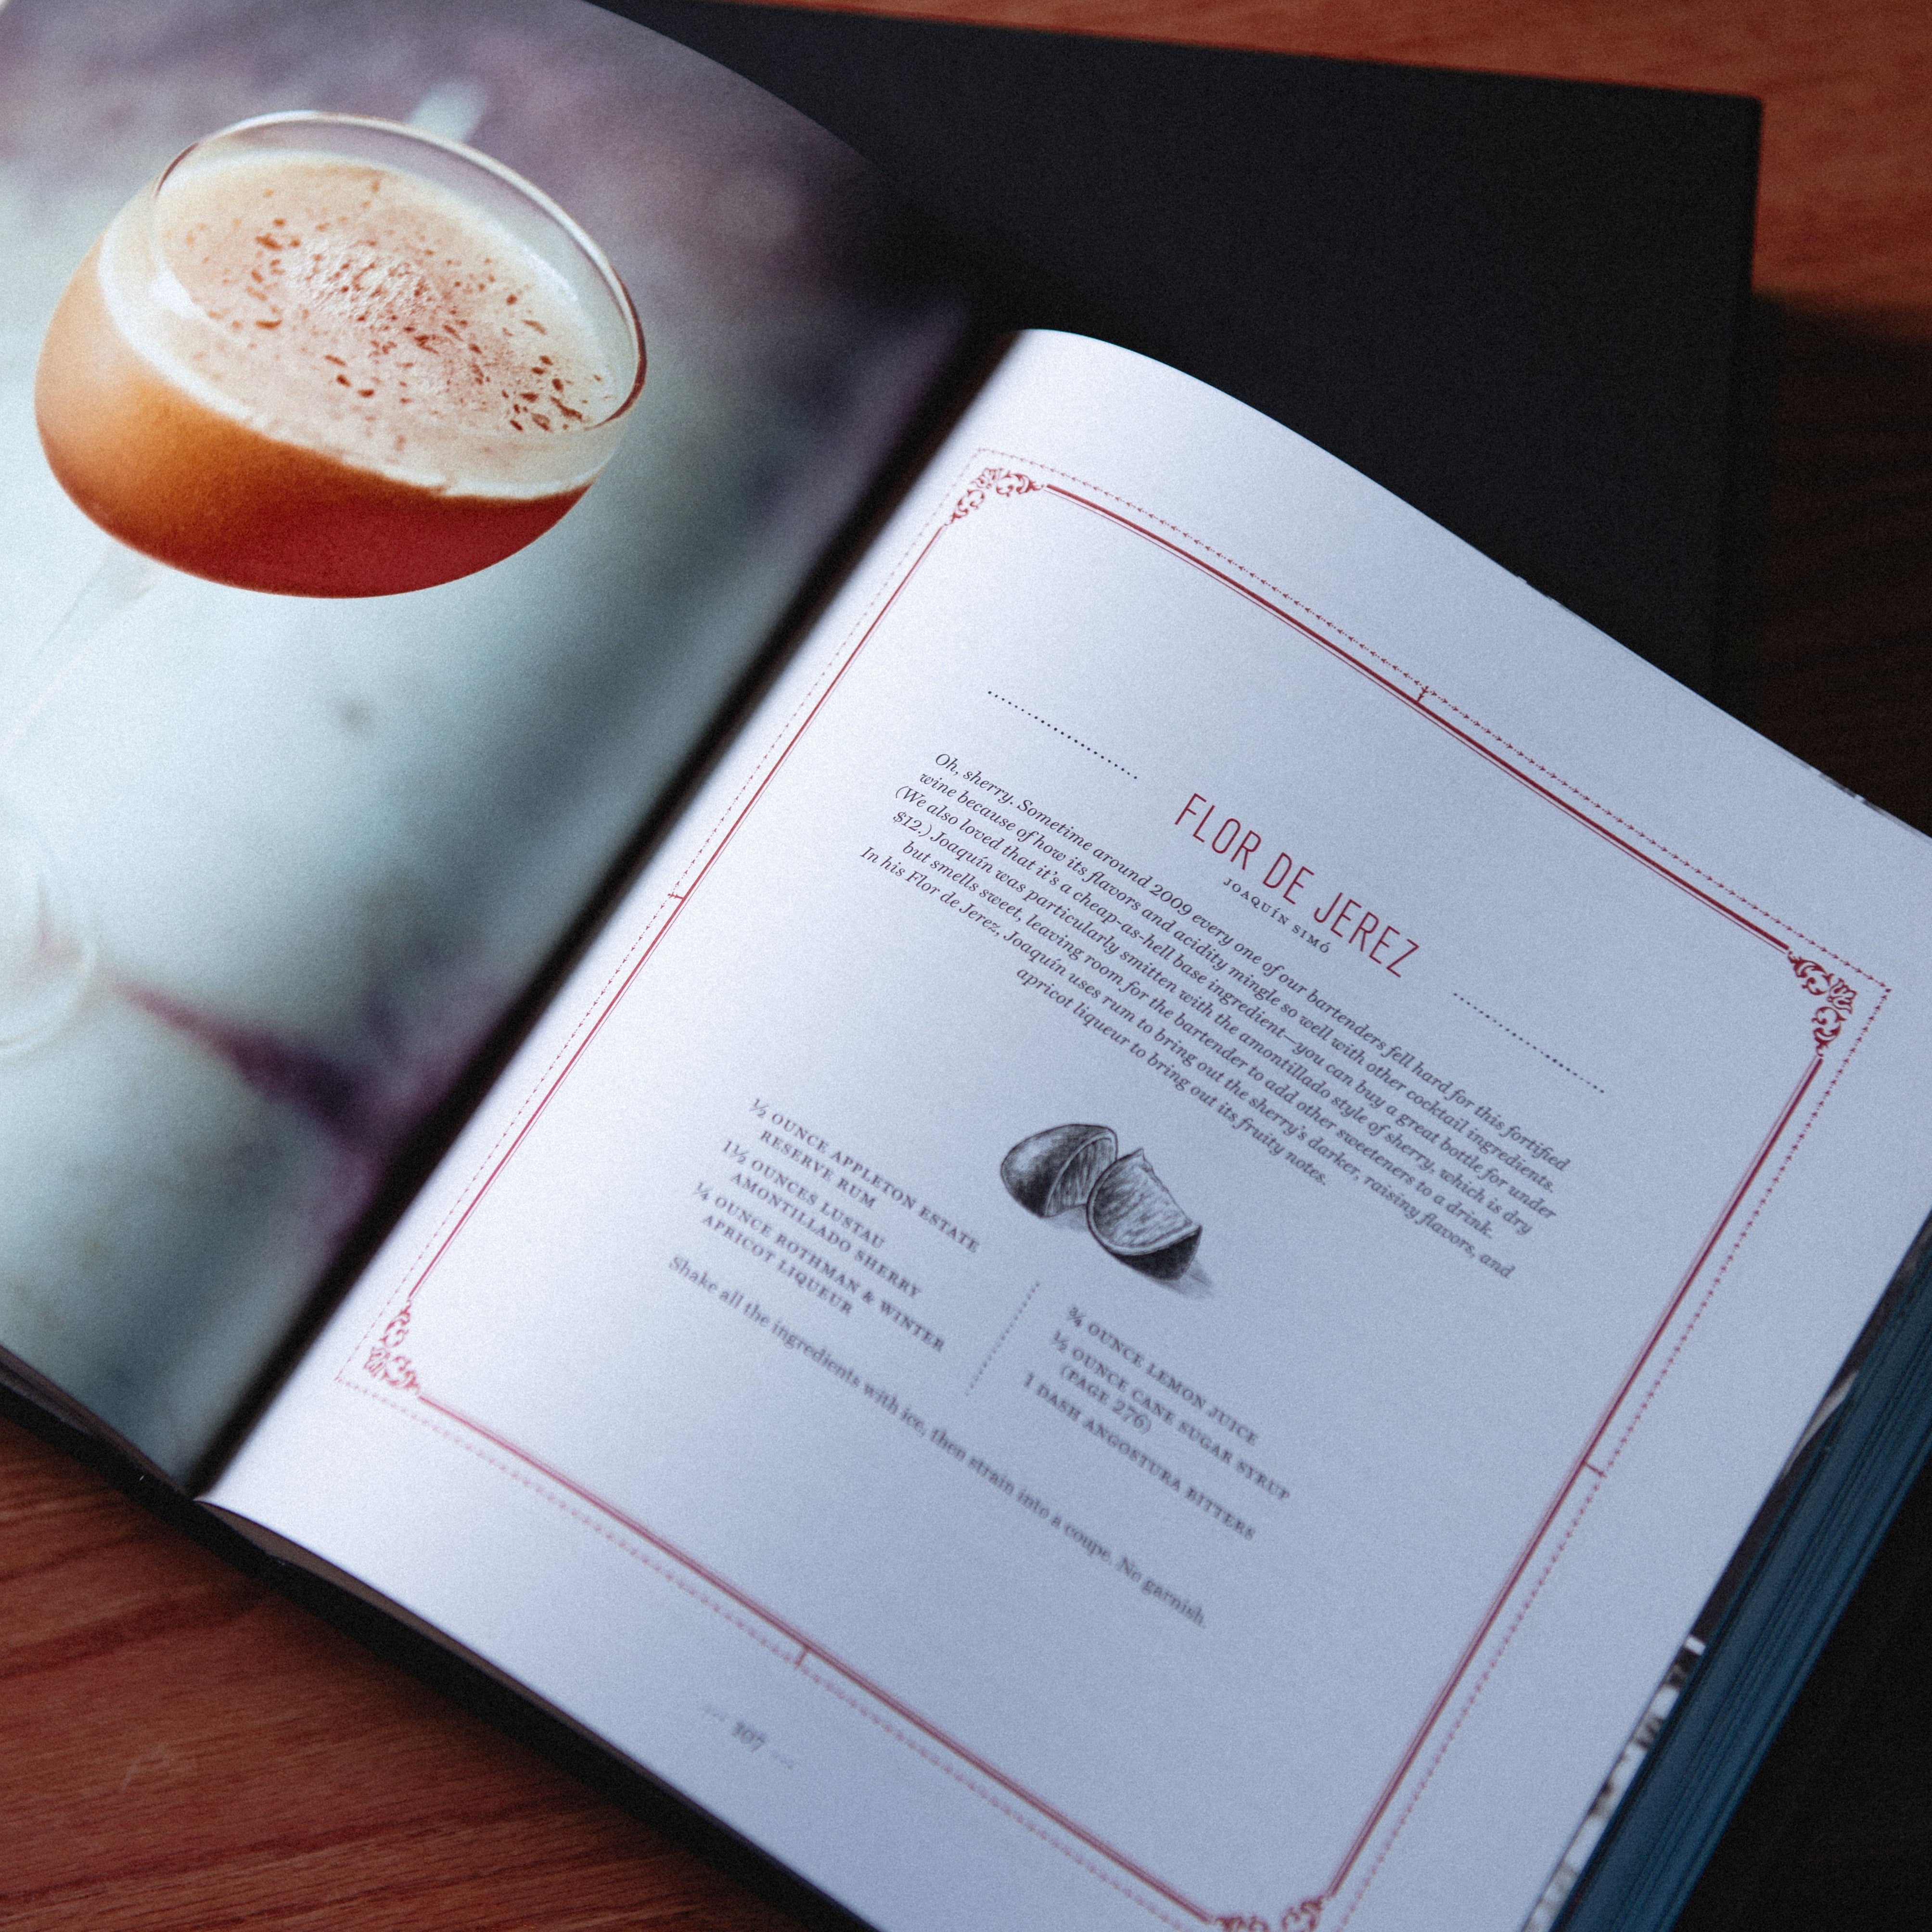 Death & Co.: Modern Classic Cocktails with More 500 Recipes — David Ka -  Pretty Things & Cool Stuff